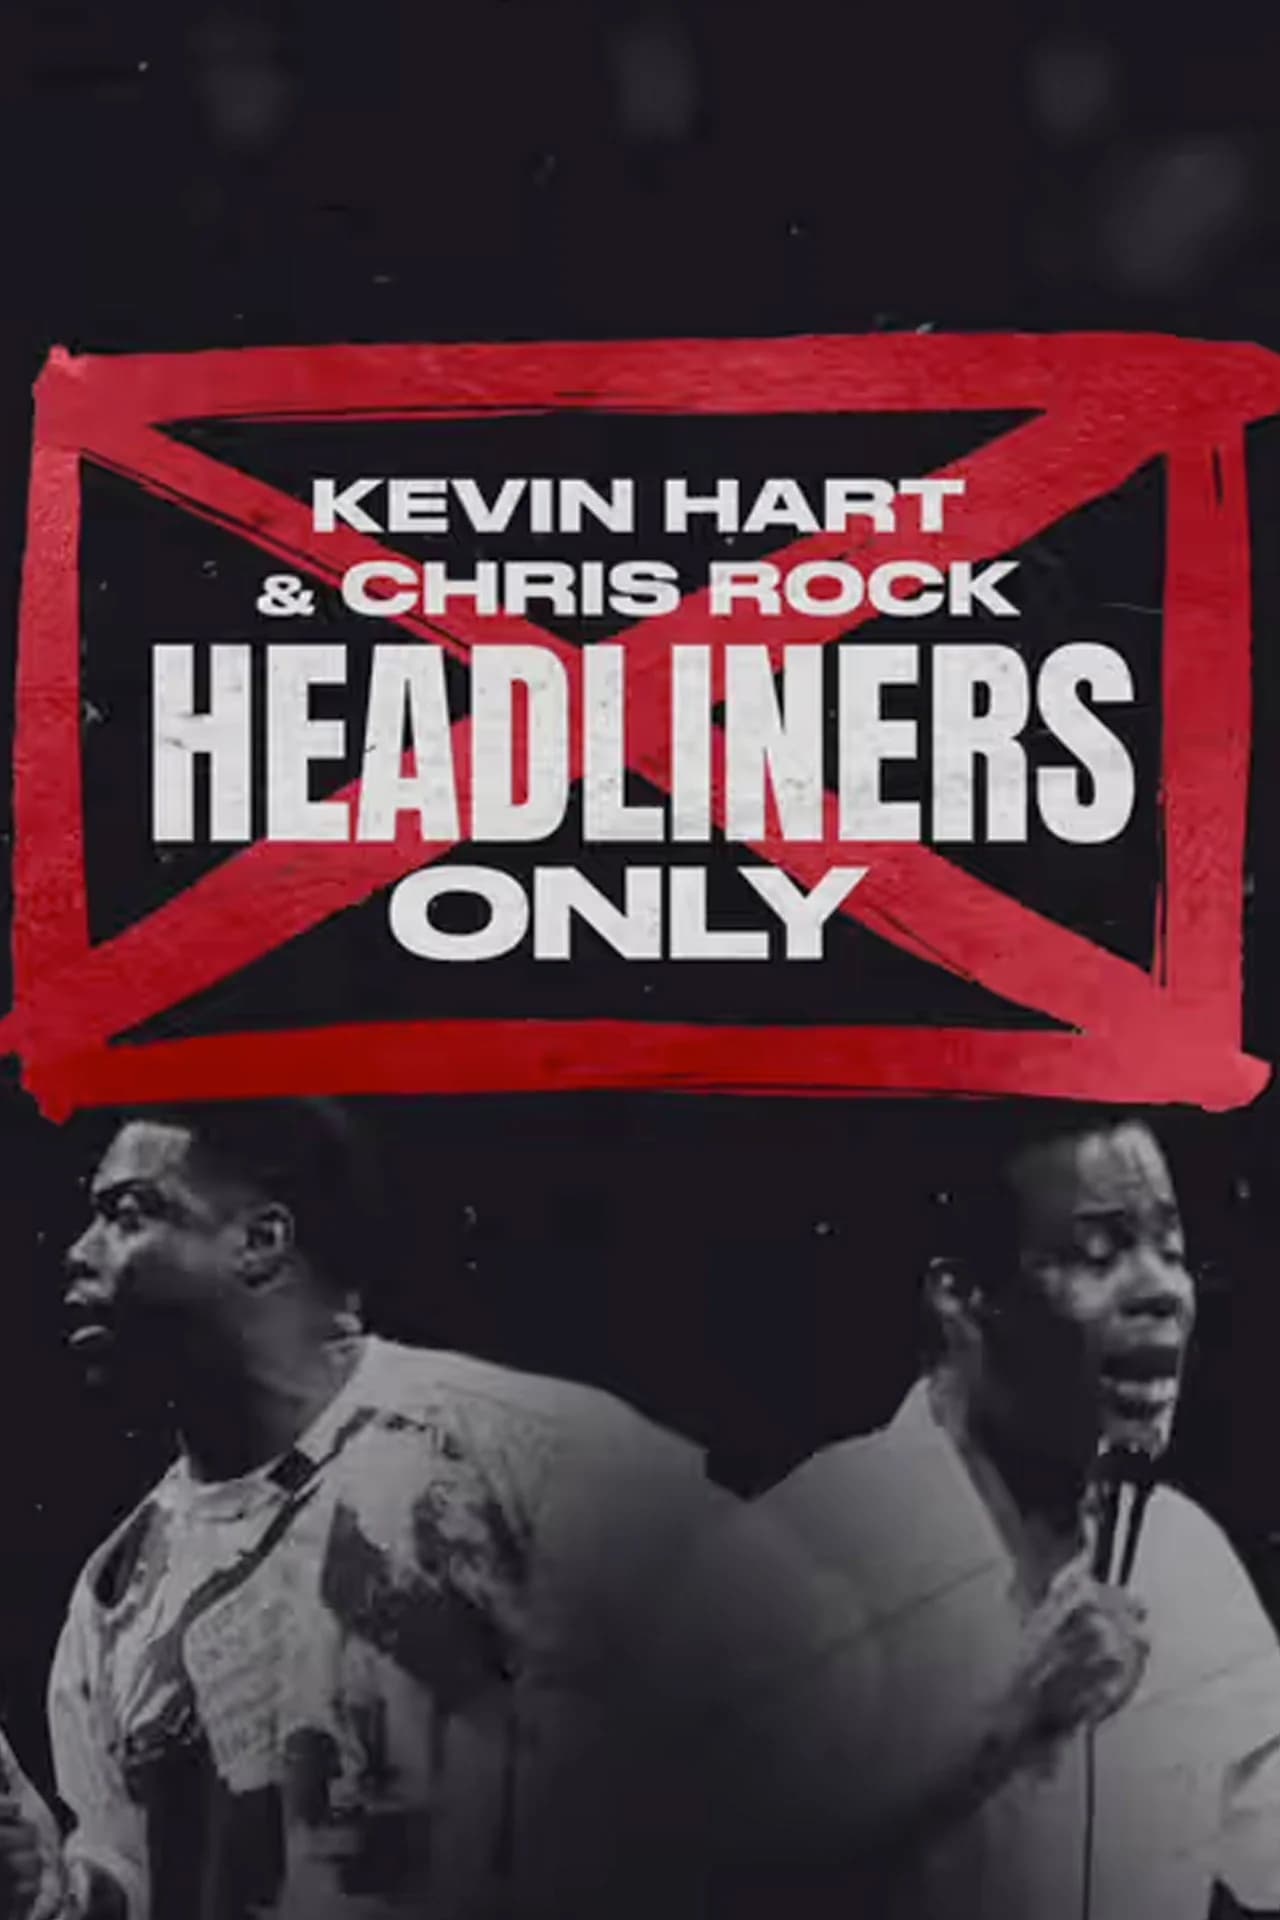 Kevin Hart & Chris Rock: Headliners Only (December 12) - Streaming on Netflix